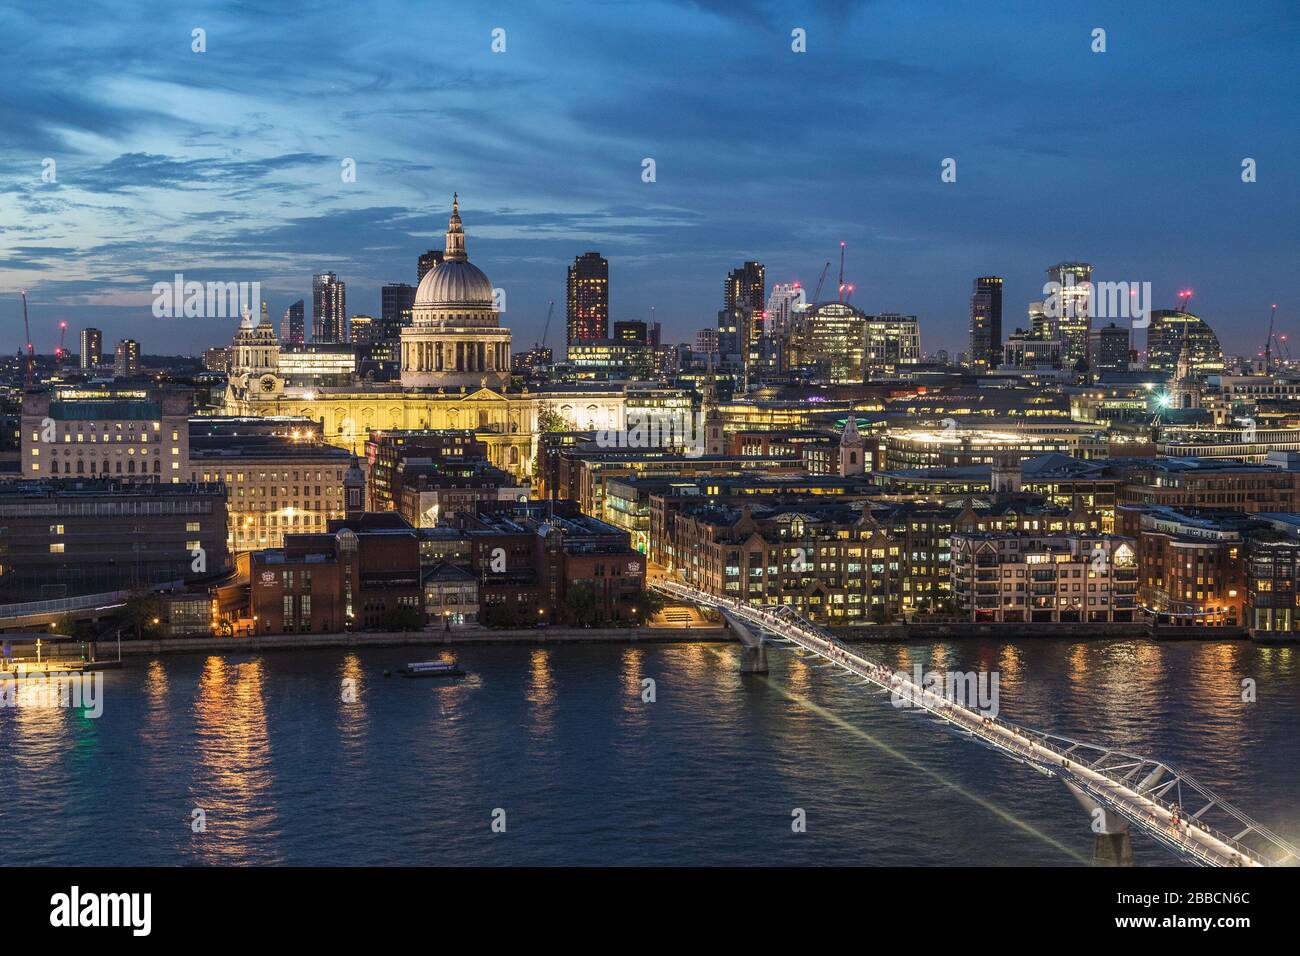 LONDON, UK - 24TH AUGUST 2019: A view towards St Pauls from across the River Thames at night. People can be seen on Millennium Bridge Stock Photo